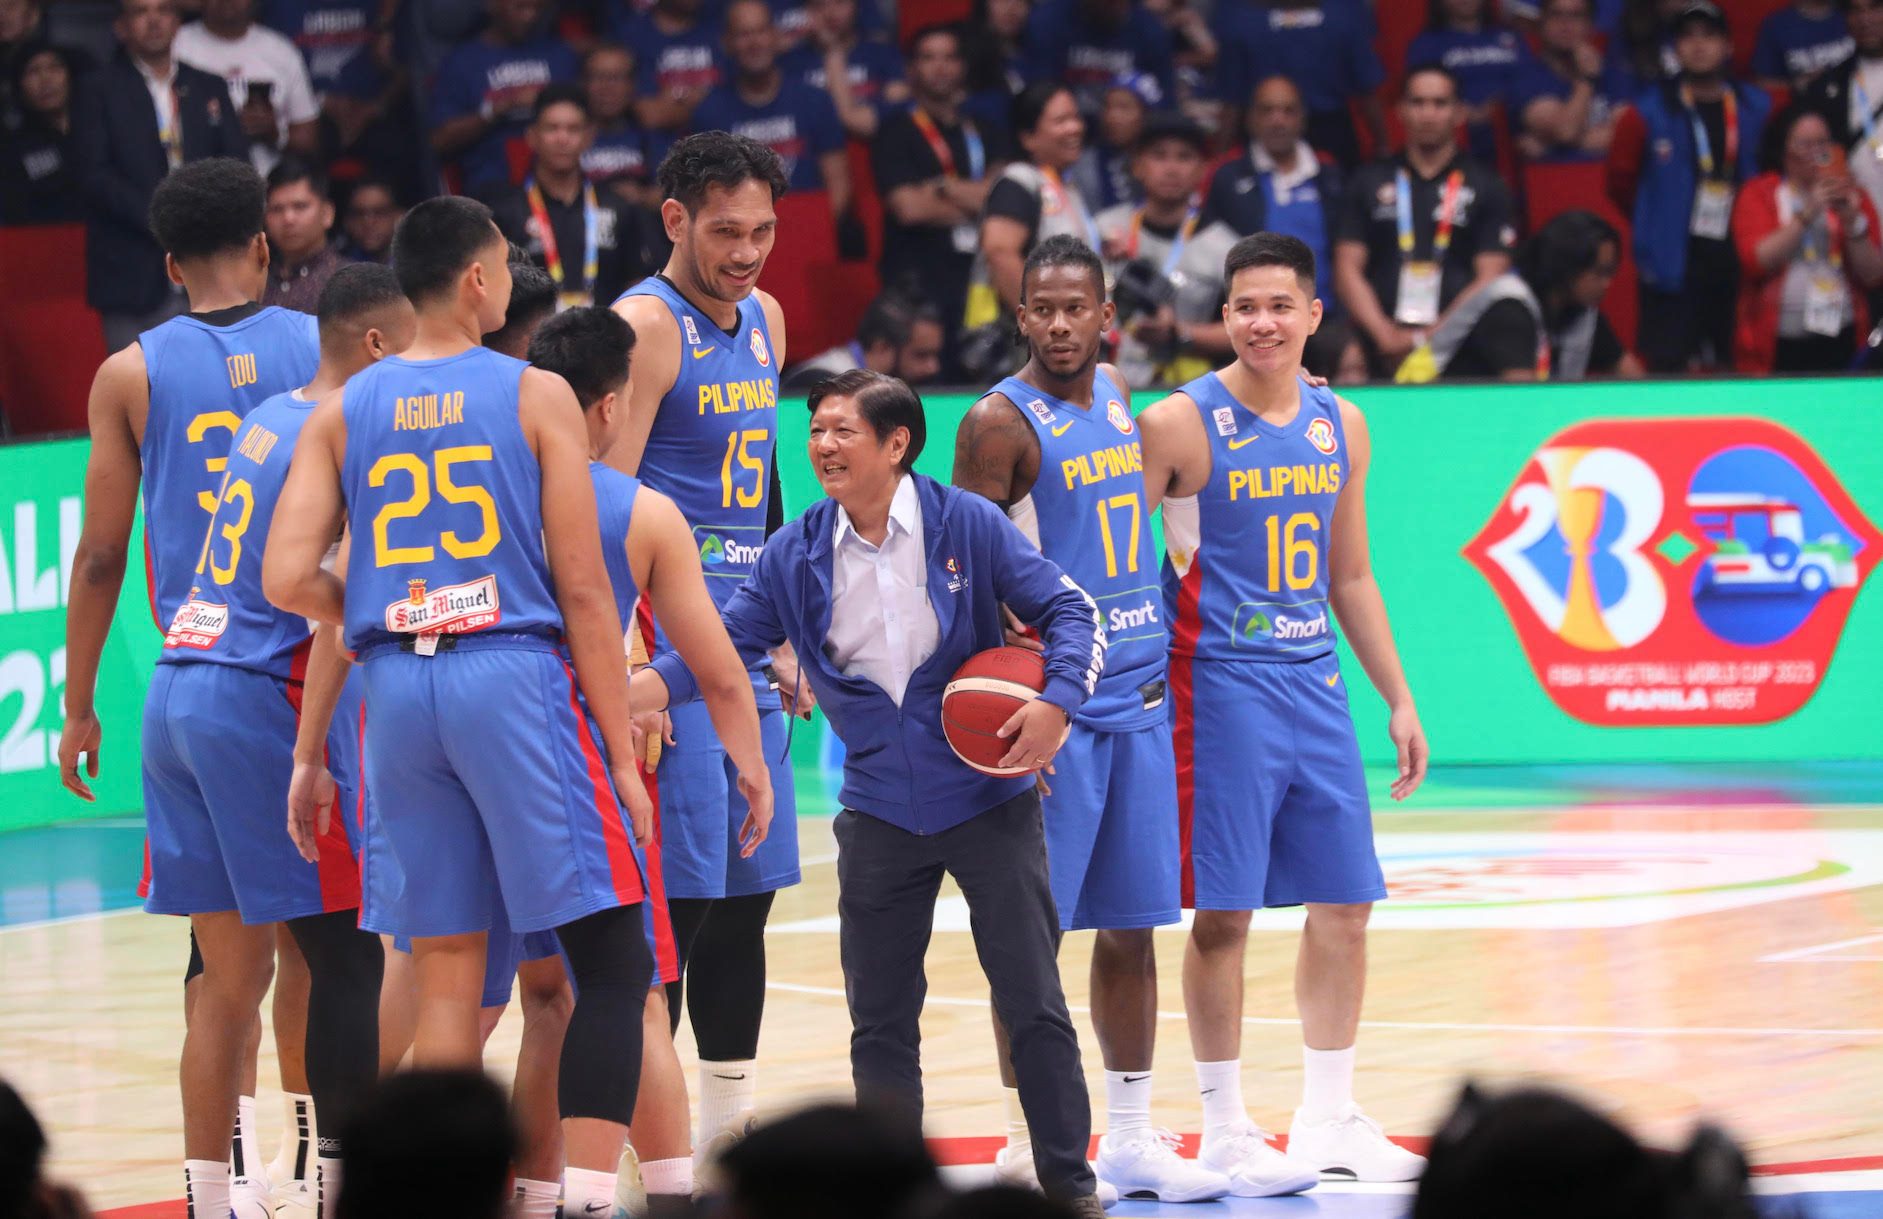 Another Marcos welcomes FIBA World Cup to the Philippines